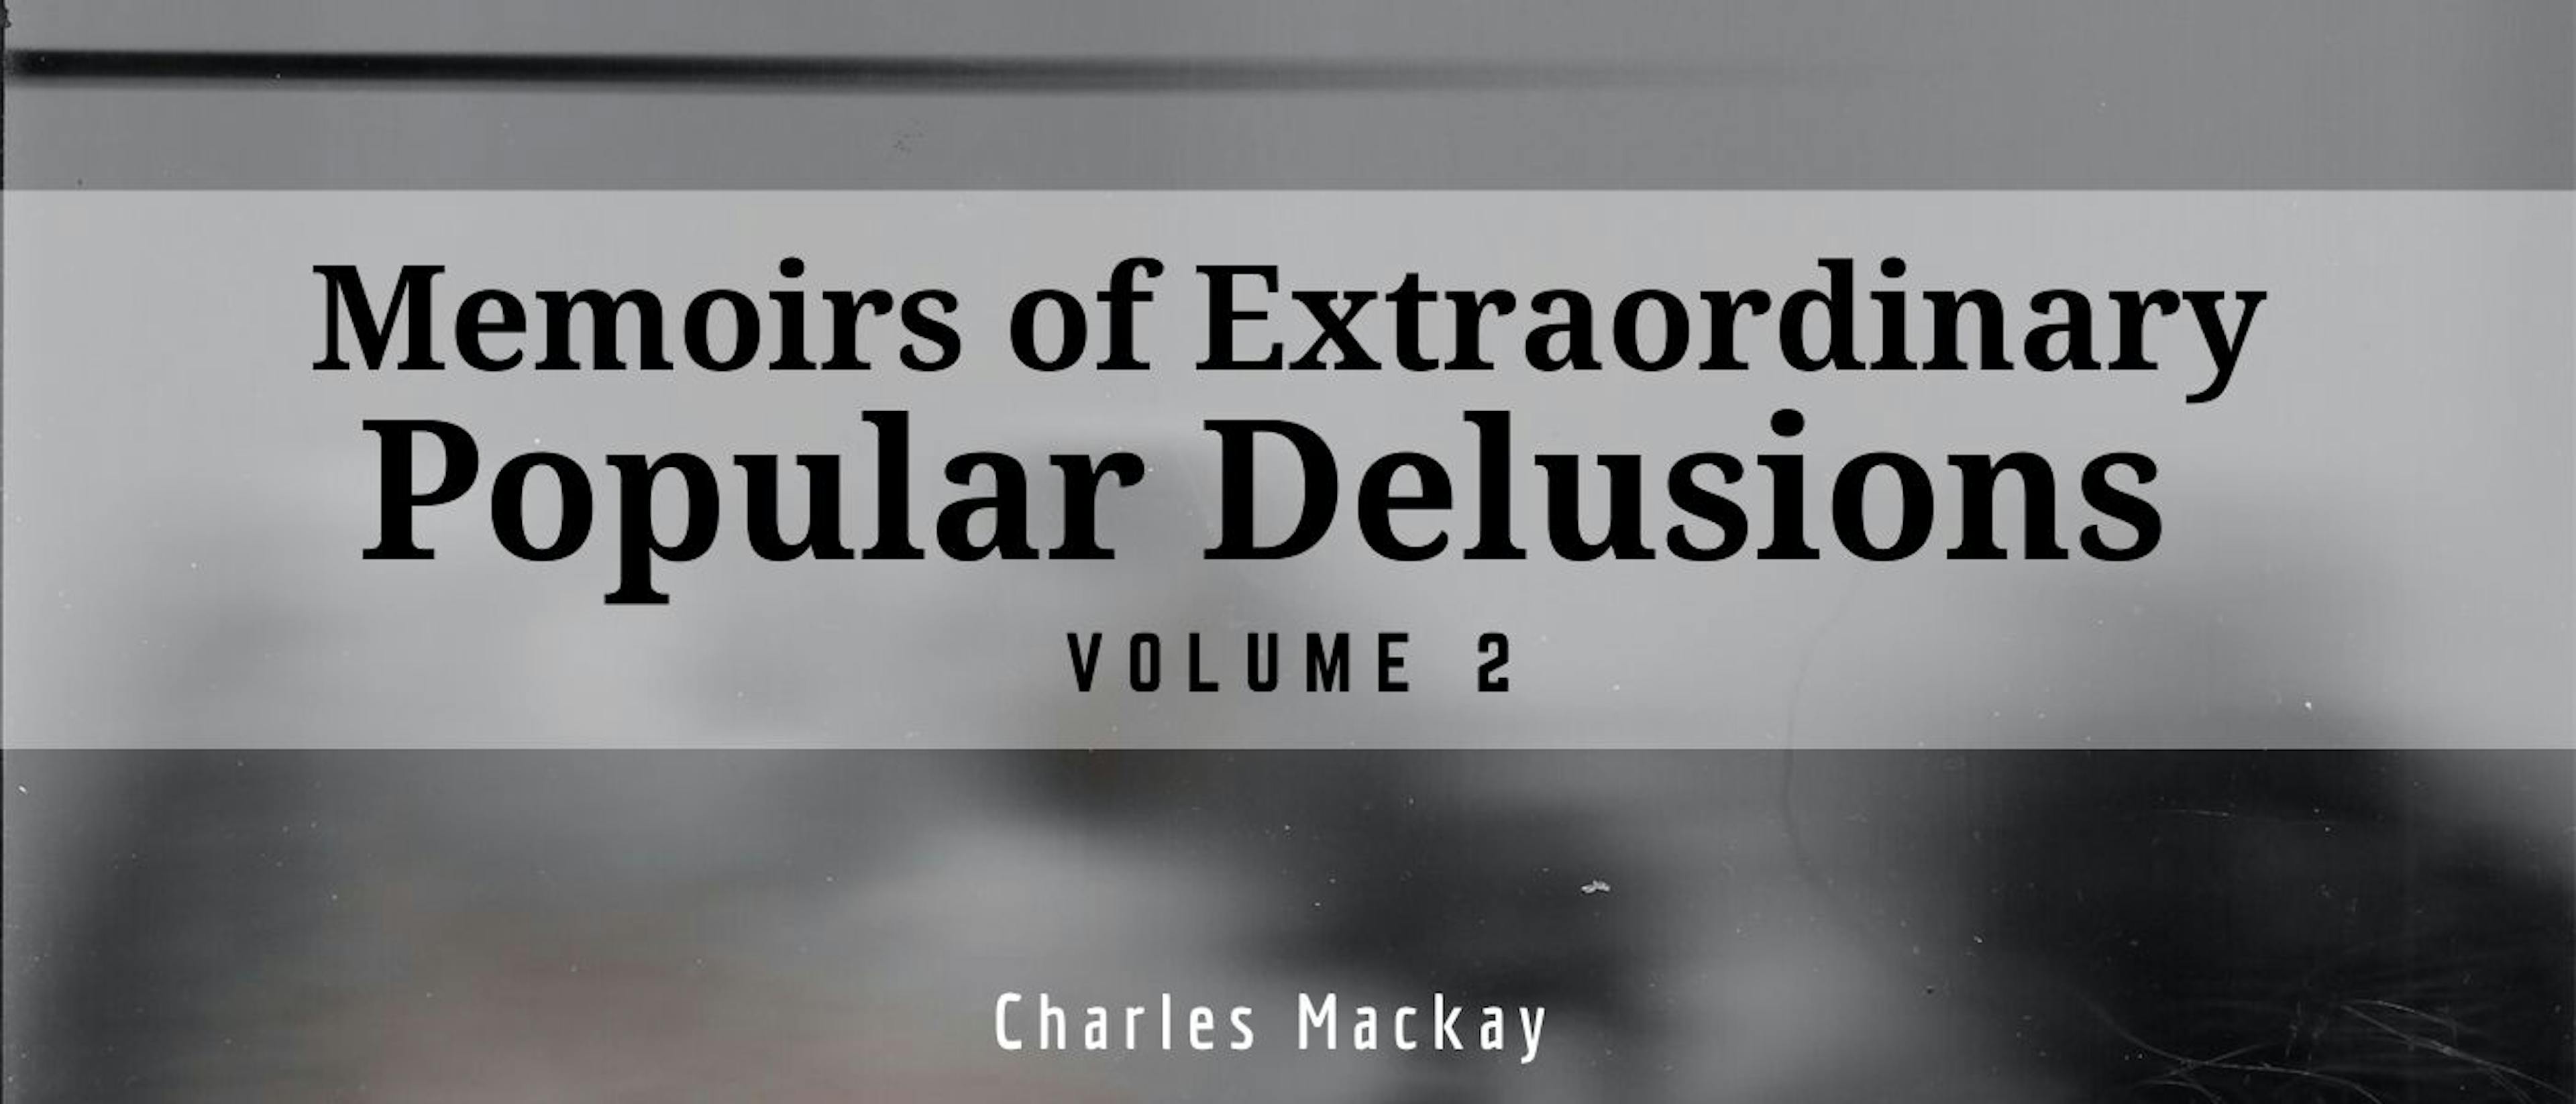 featured image - Memoirs of Extraordinary Popular Delusions — Volume II by Charles Mackay - Table of Links